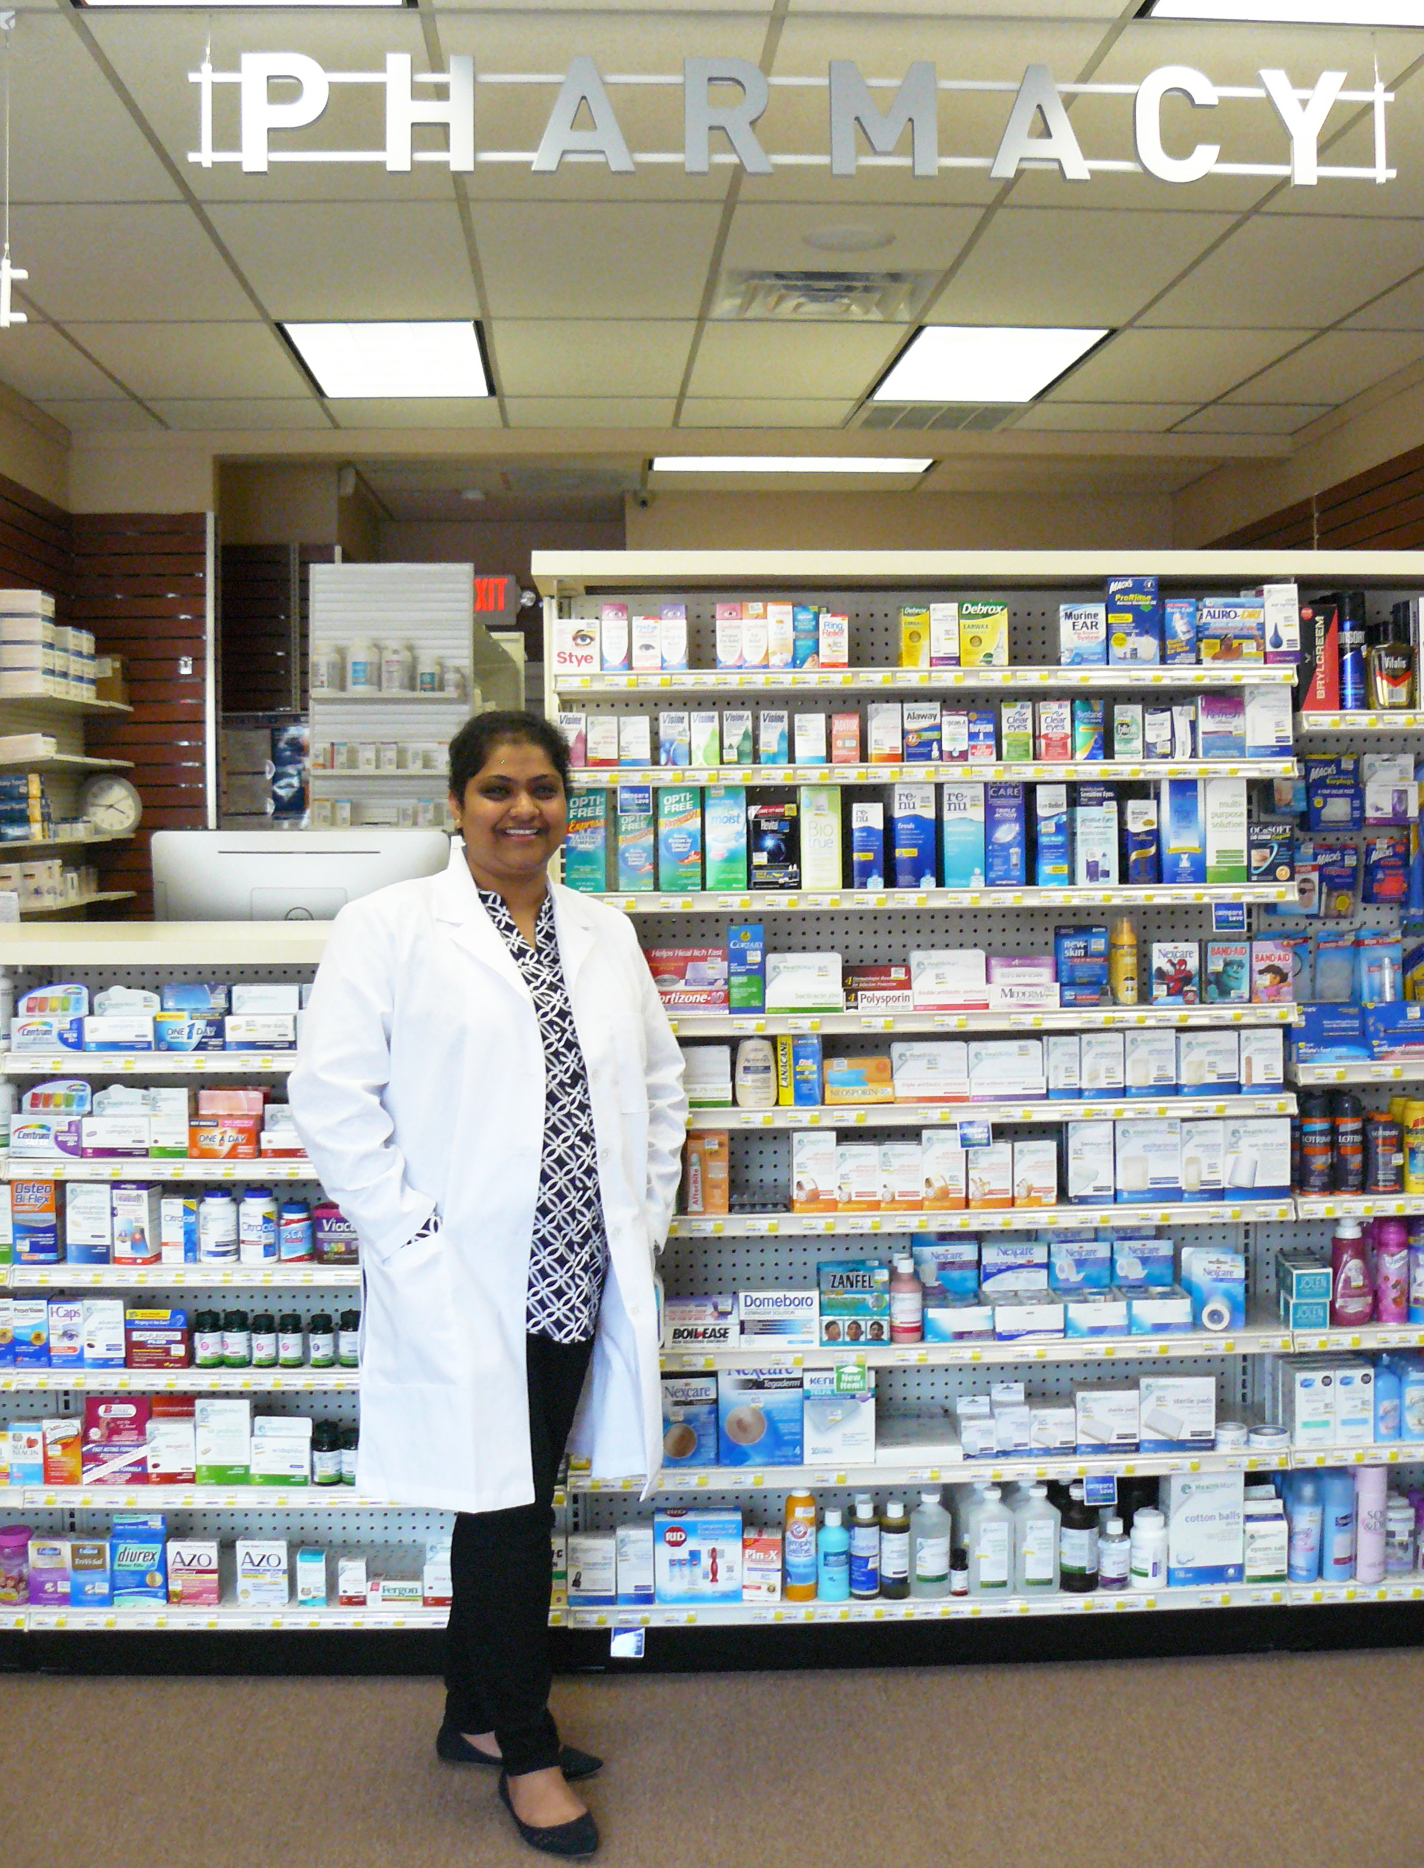 Small, independent: New pharmacy downtown tries different prescription